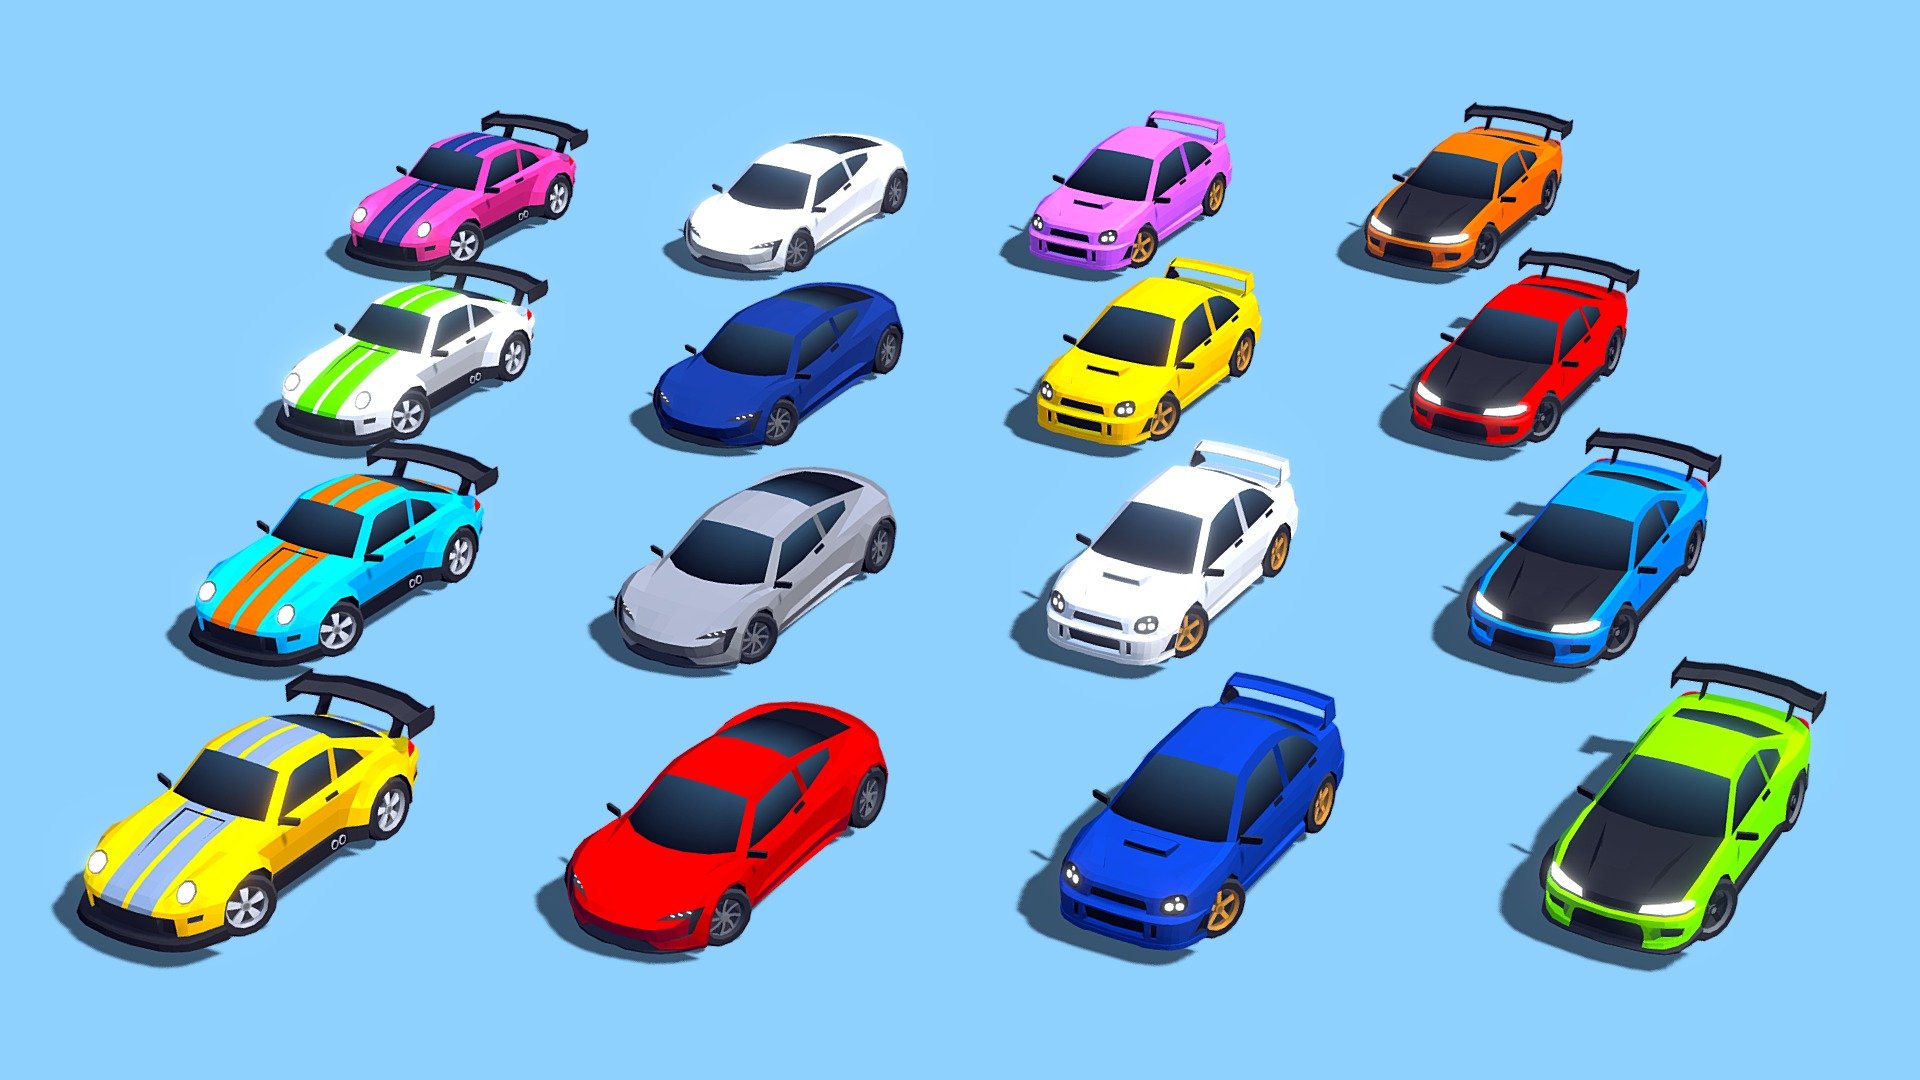 January update (2023.1) of the Low Poly Cars - Mega Pack asset, which is available in the Unity Asset Store.

It includes 4 new cars: Tesla Roadster 2023, Nissan Silvia S15 (Drift), Porsche 911 RUF (Wide) and Subaru WRX STI 2002 (Bug Eye) 3d model